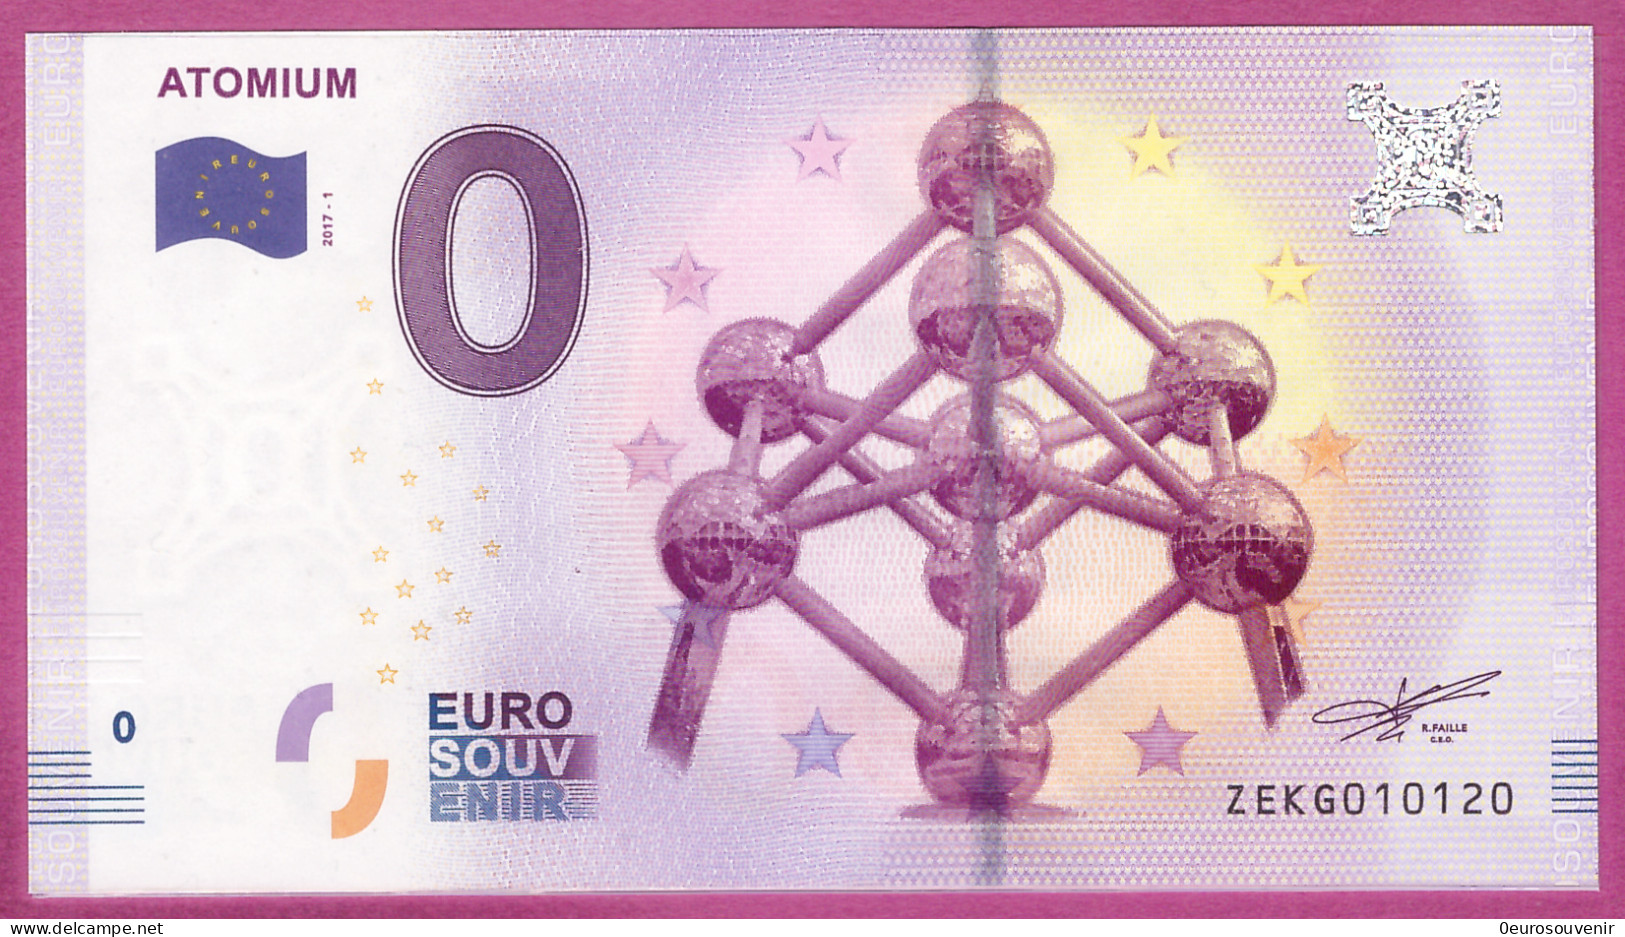 0-Euro ZEKG 2017-1 ATOMIUM S-2b - Private Proofs / Unofficial